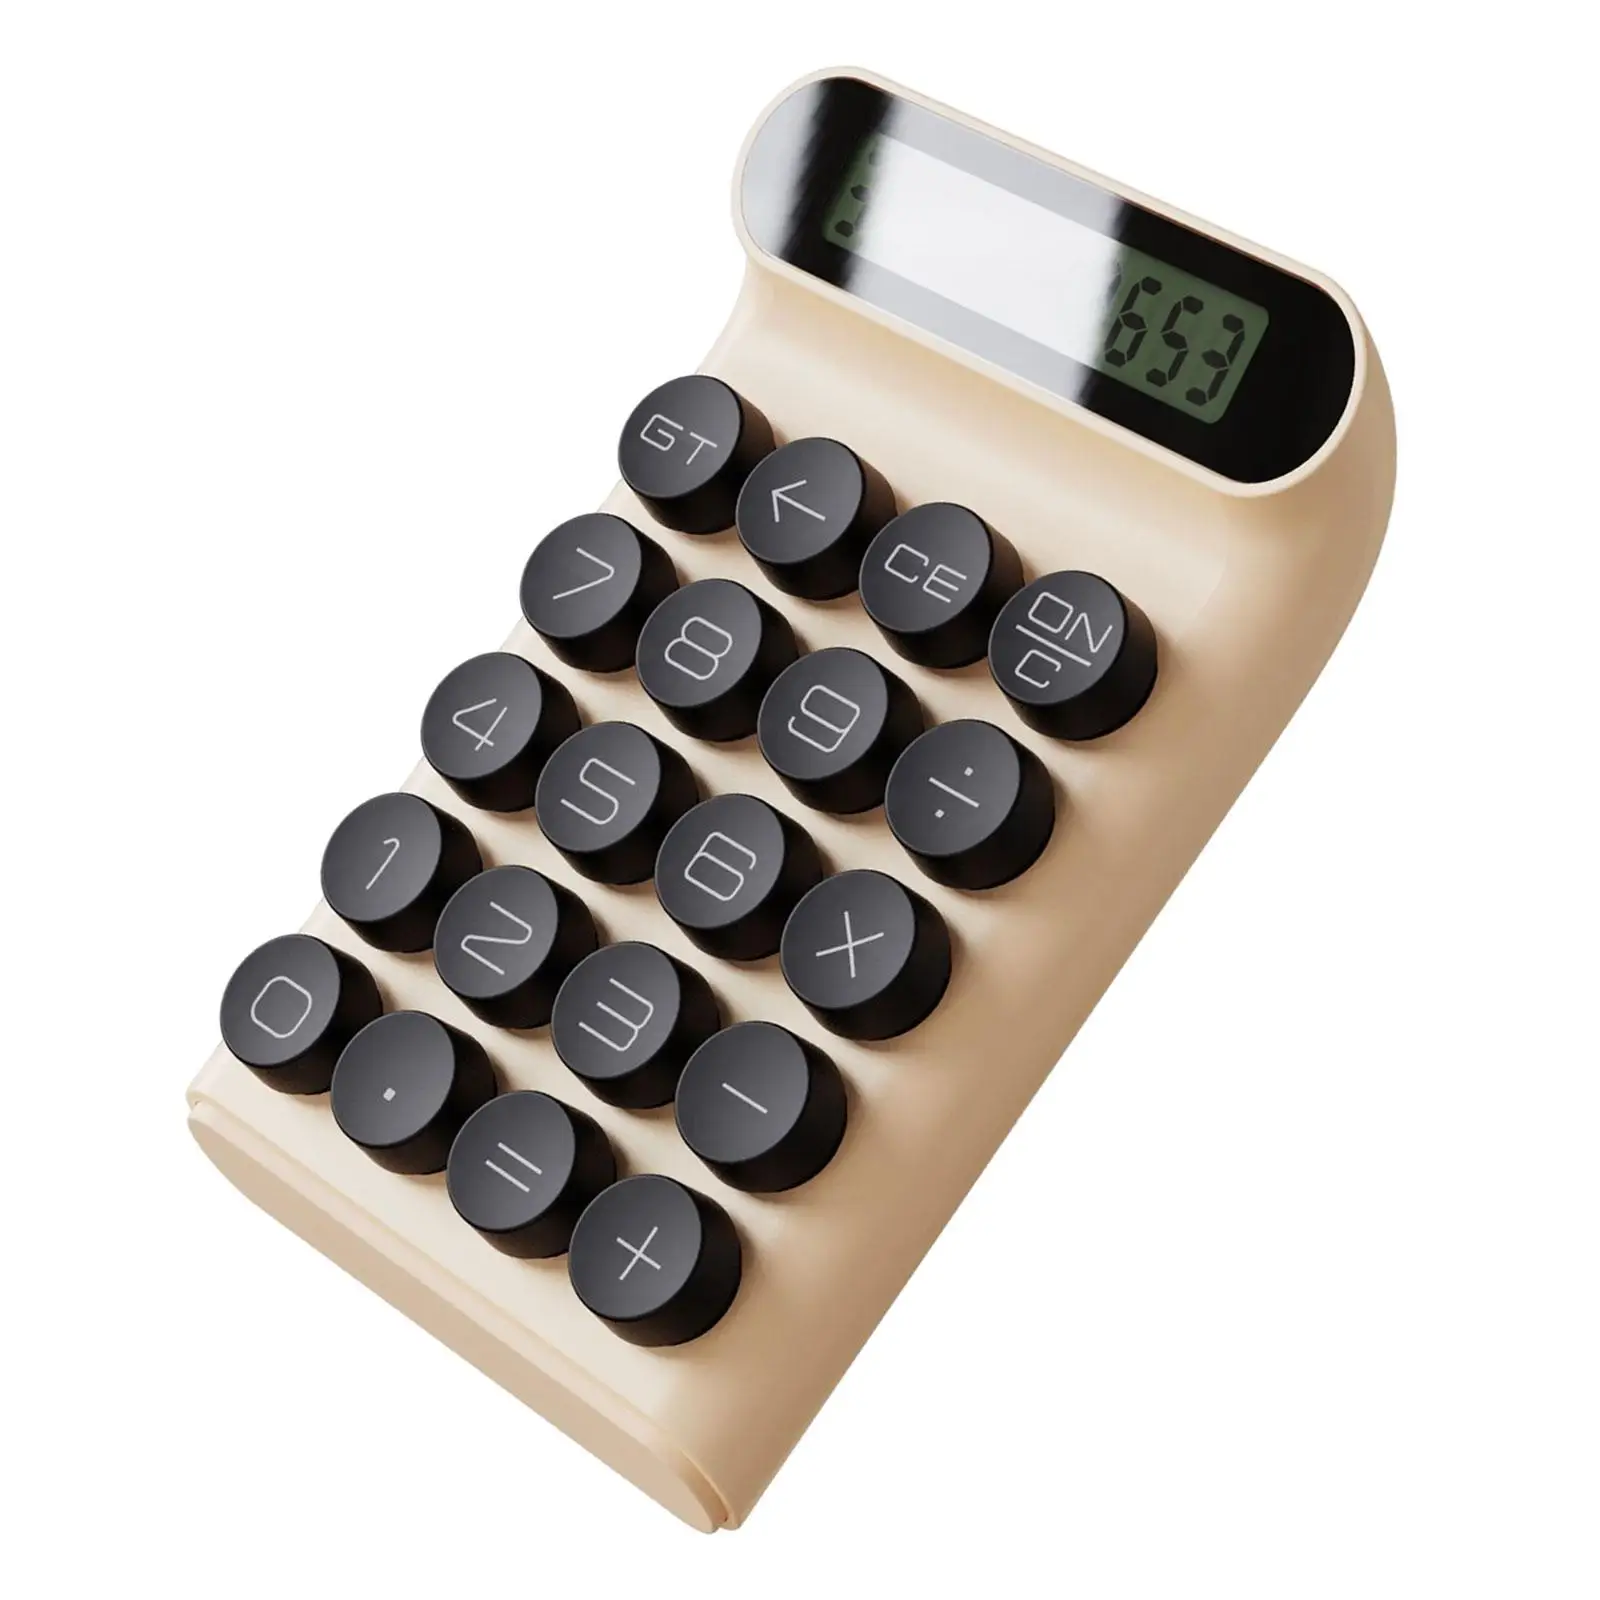 Mechanical Switch Calculator Clear Sound Curved Corner Line and Edge Big Button Calculator LCD Display Basic Office Calculator